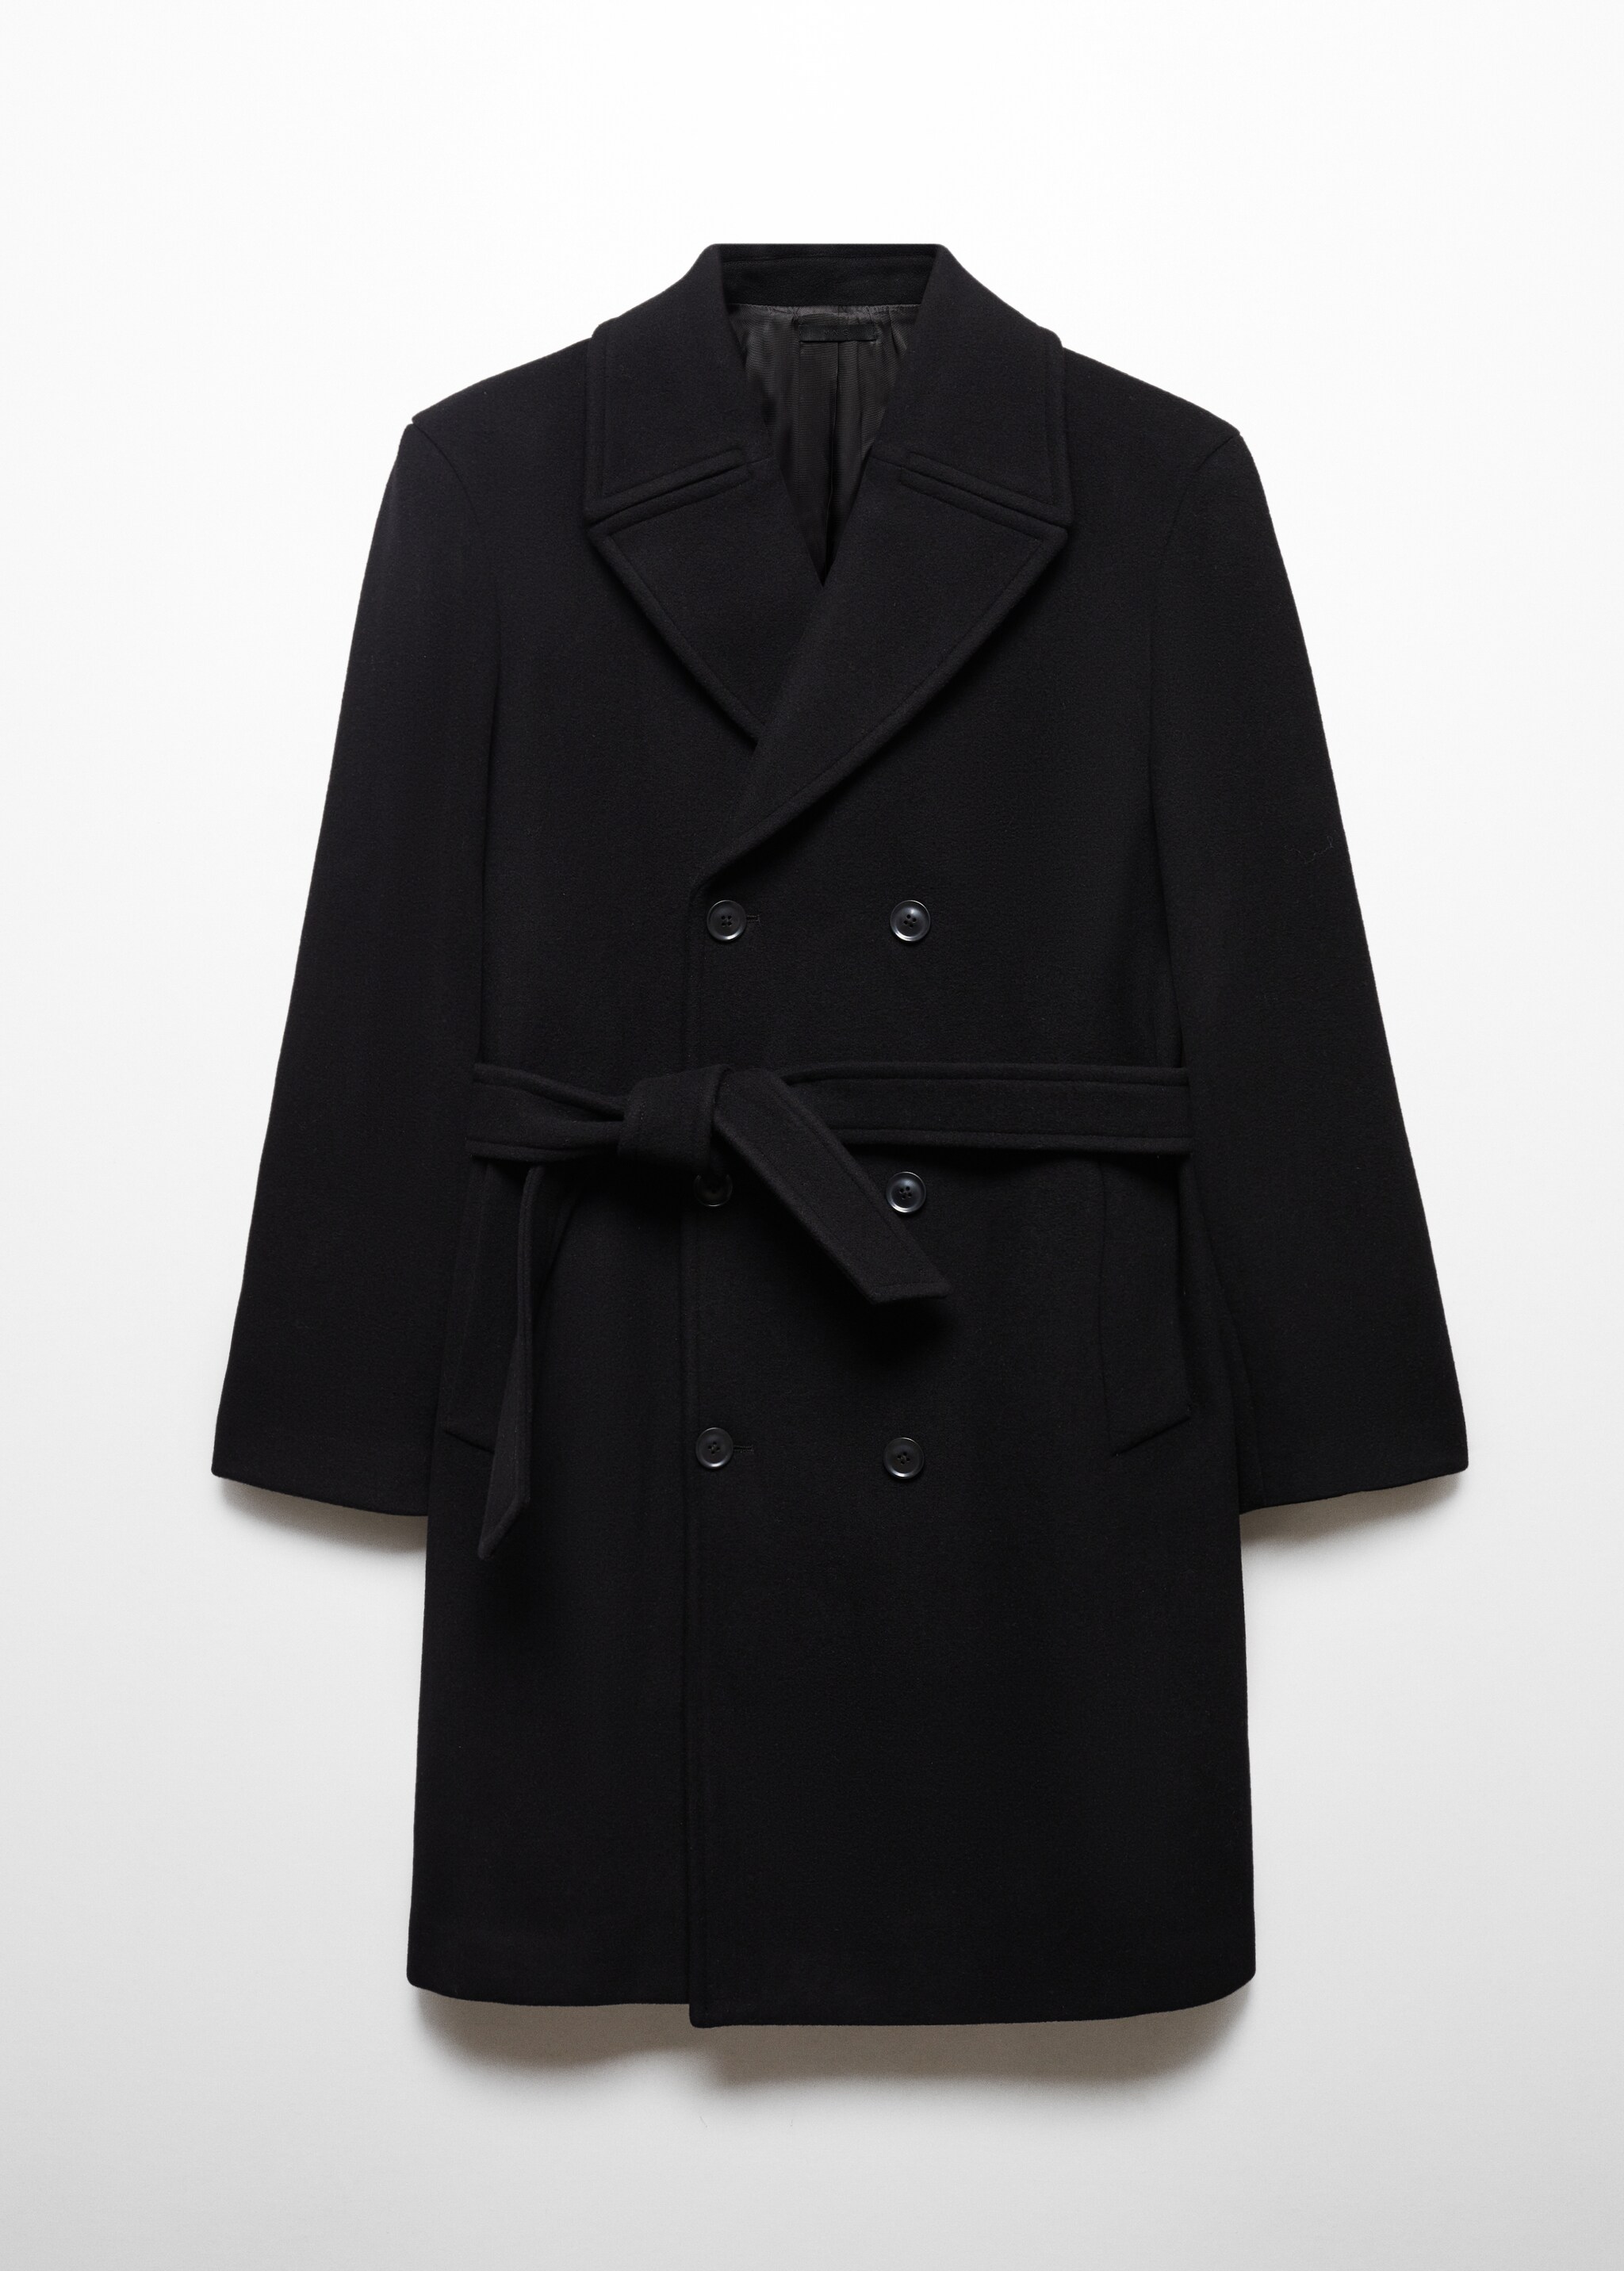 Handmade wool coat with belt - Article without model